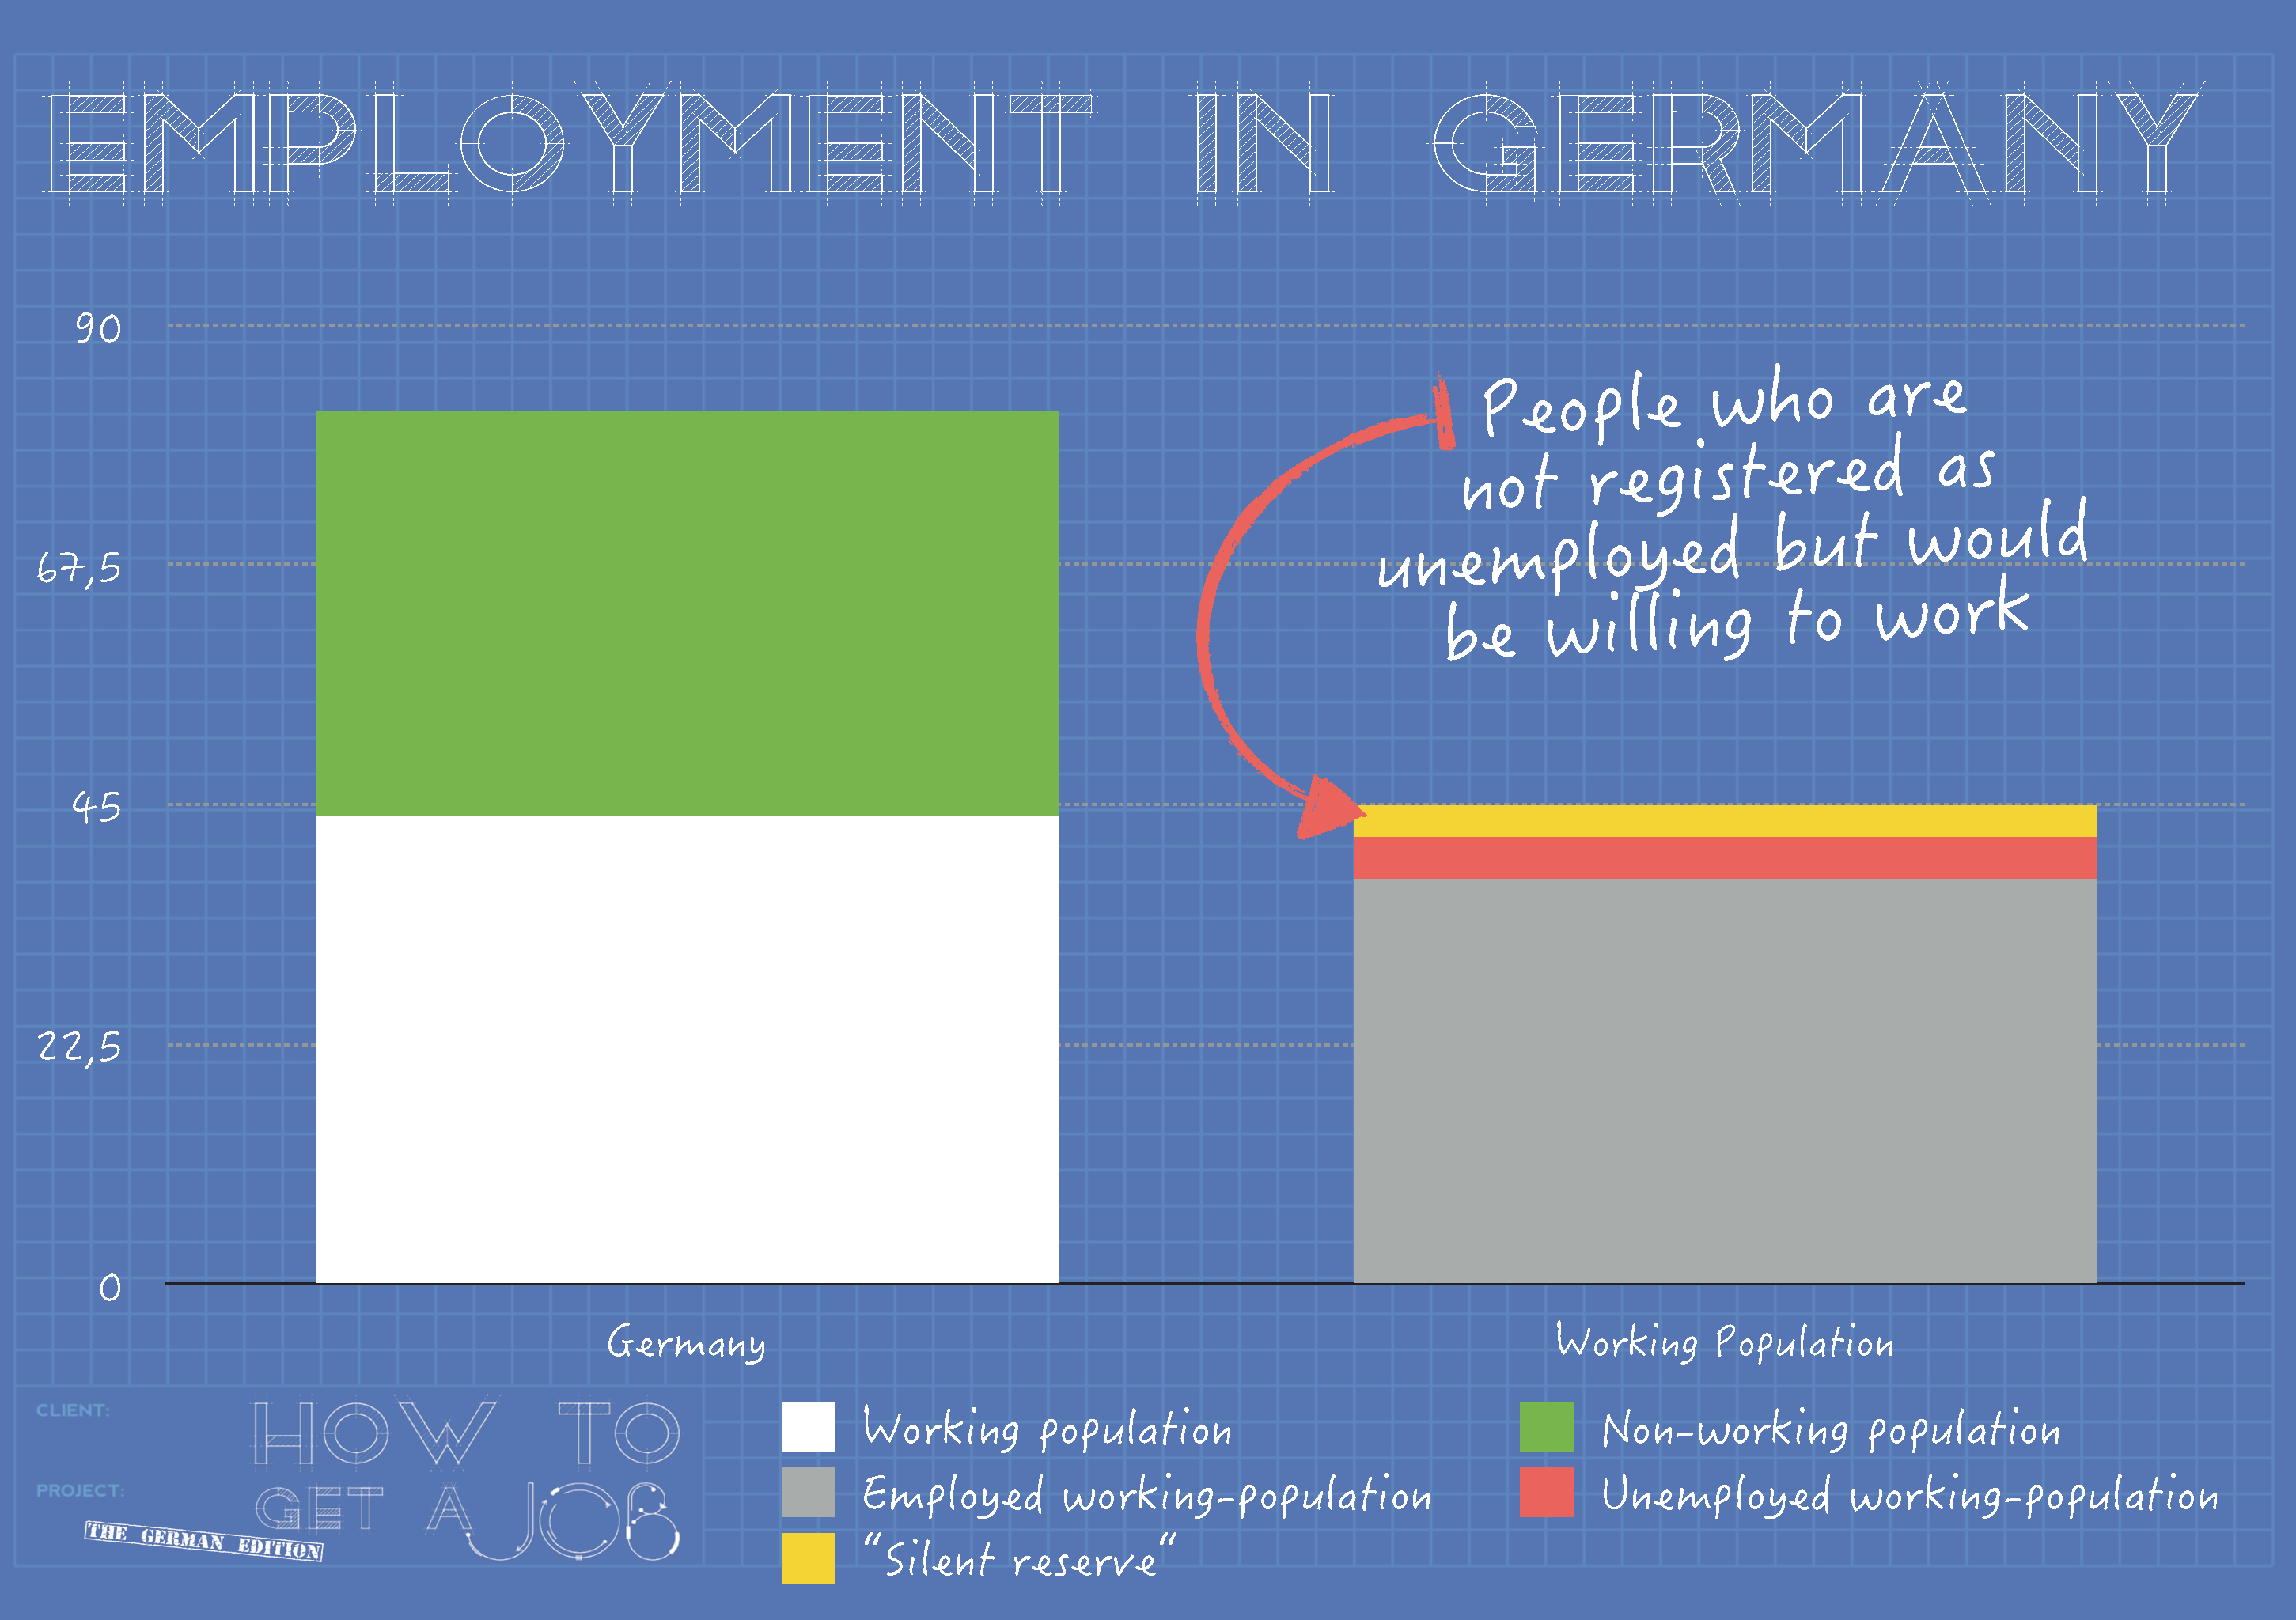 How to Get a Job in Germany Presentation Slide